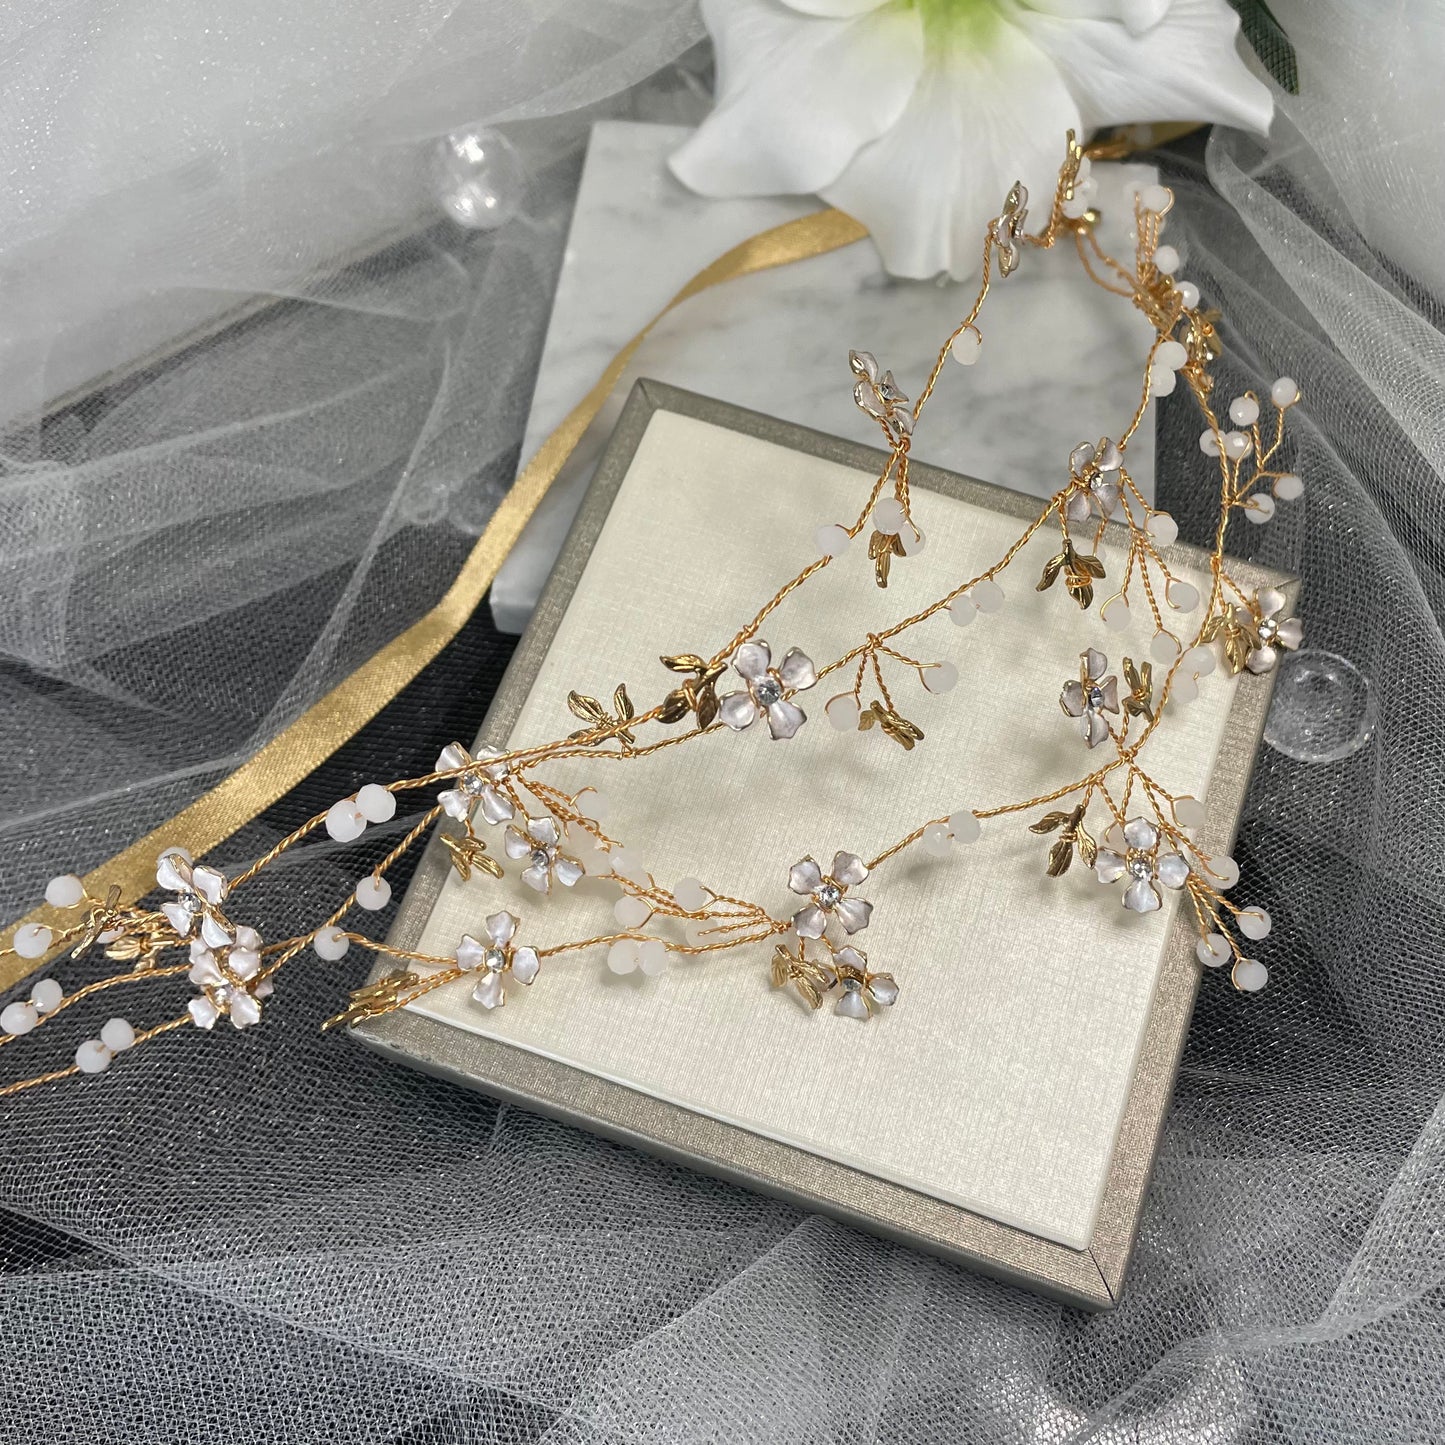 Stunning Eternal Wedding Hair Vine adorned with sparkling crystals on a goldish Rosegold wire, featuring a delicate leaf and floral design, perfect for enhancing bridal hairstyles with natural elegance.